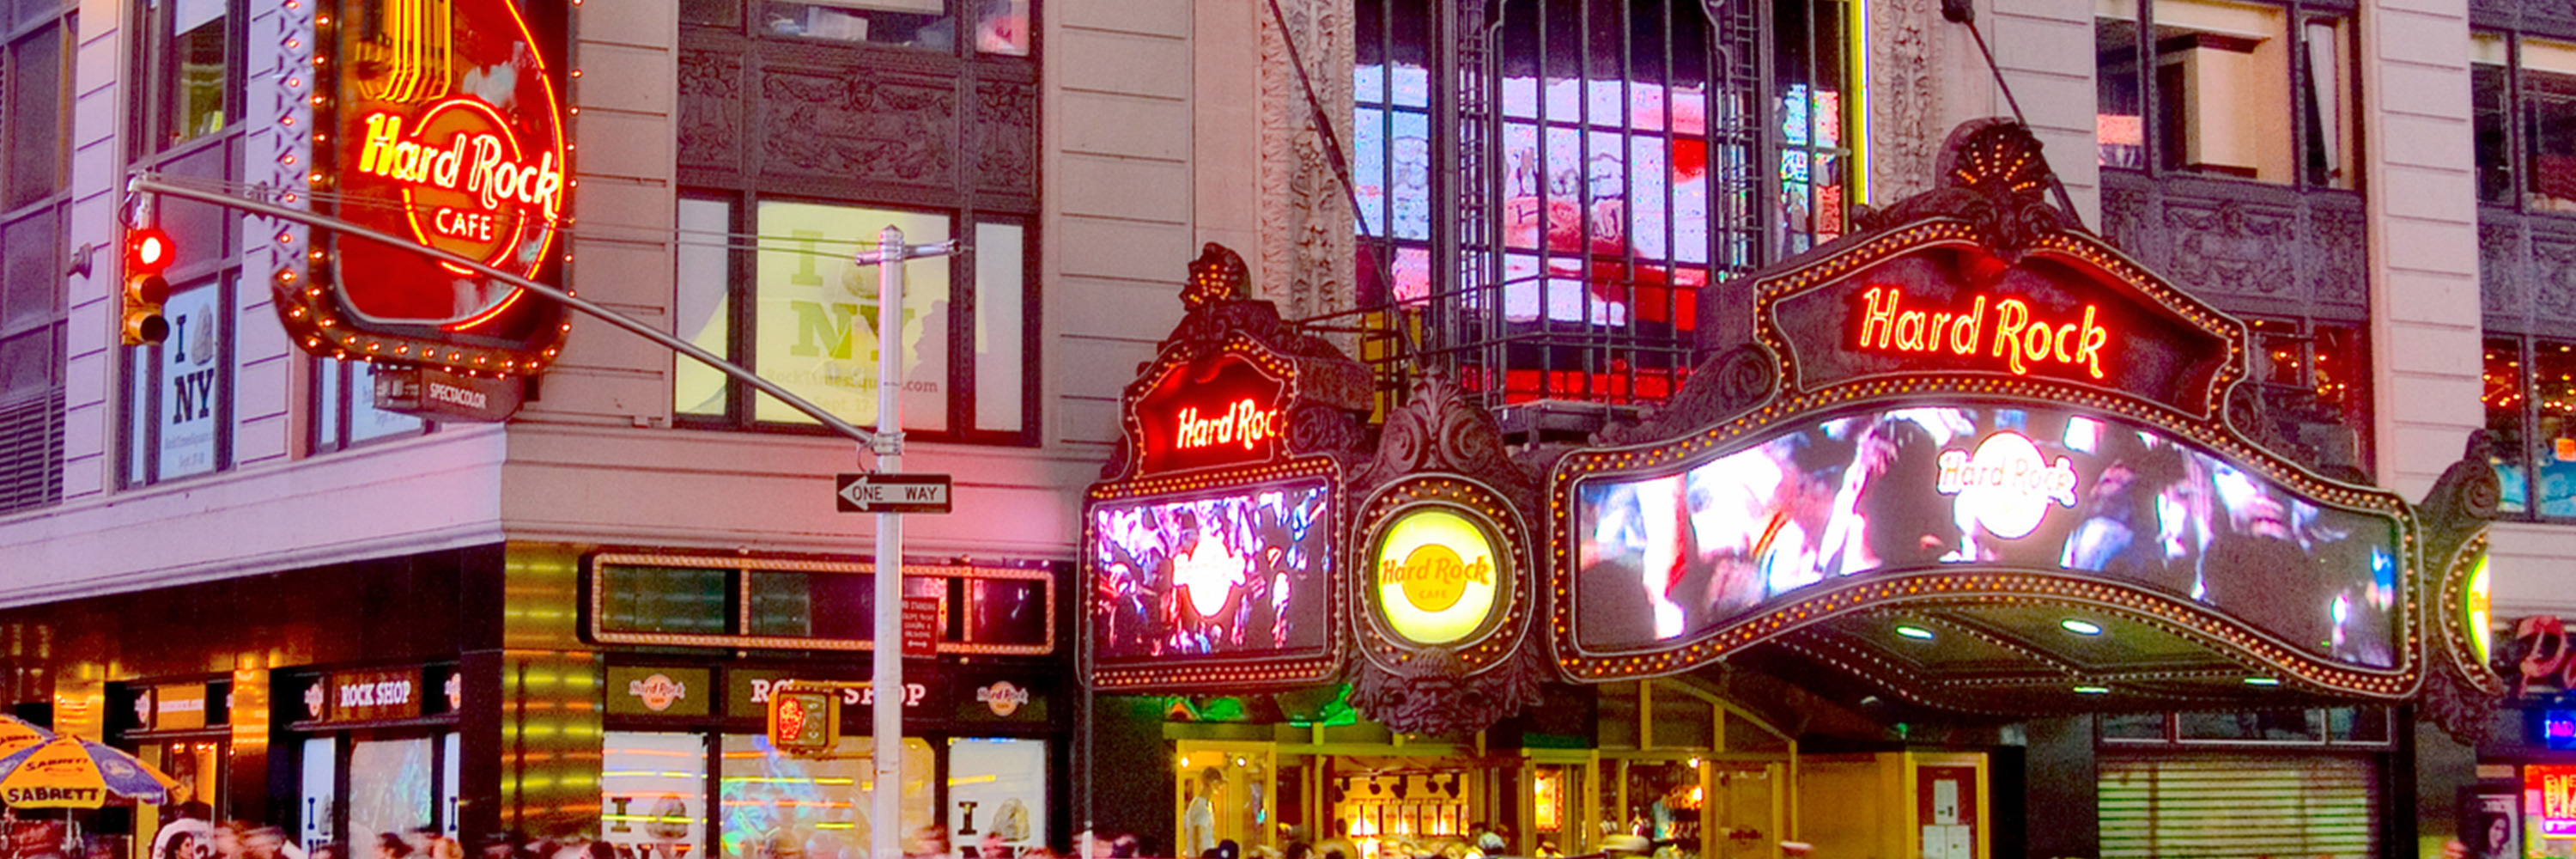 Hard Rock Cafe New York | New York Top Dining Experience